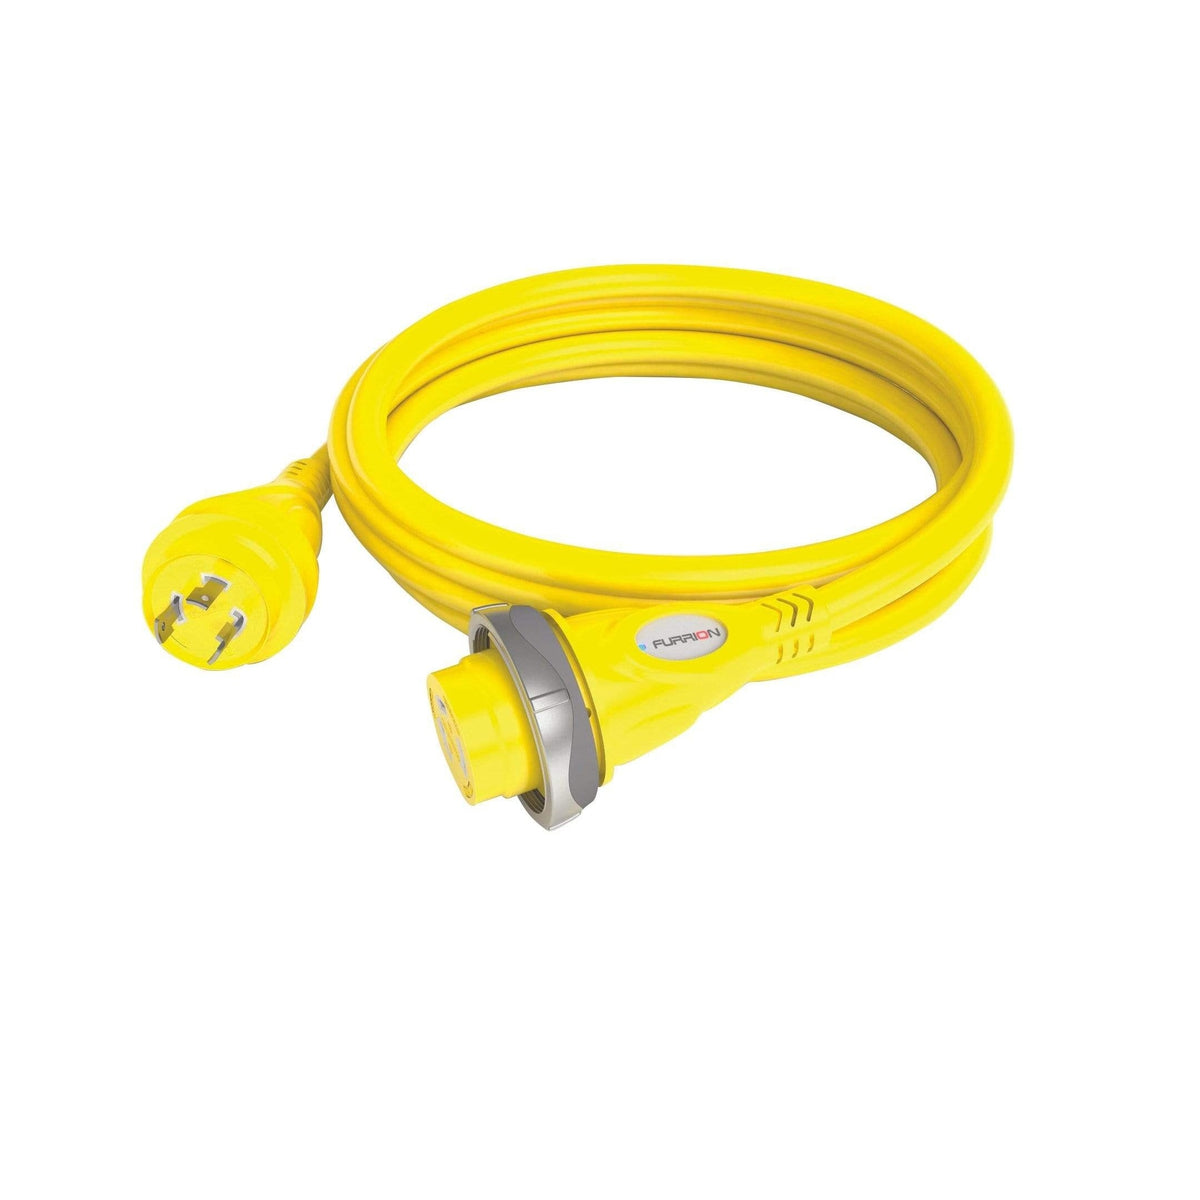 Furrion Qualifies for Free Shipping Furrion 30a Cordset 12' Yellow #381690